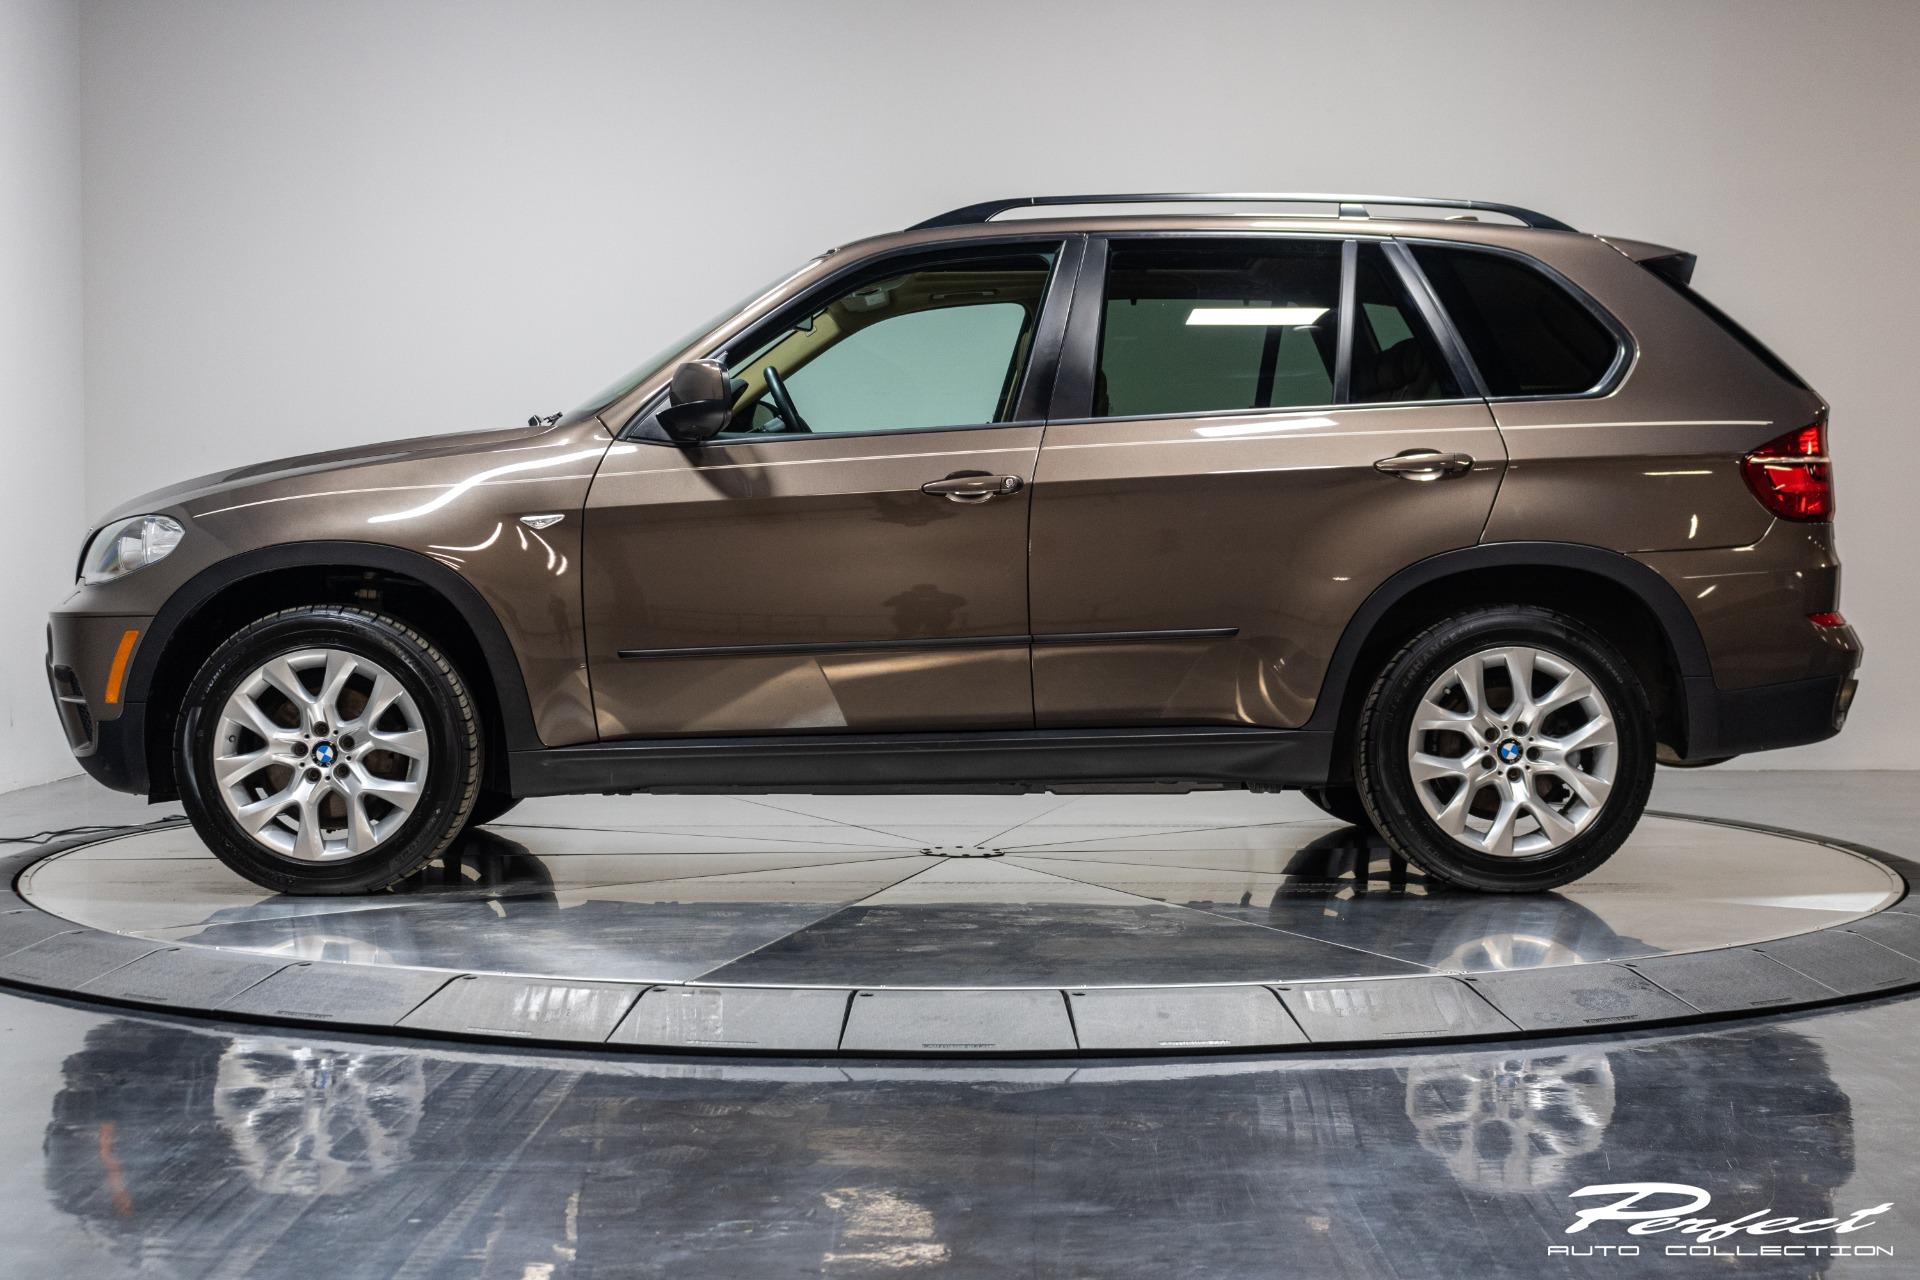 Used 2012 BMW X5 xDrive35i For Sale ($11,993) | Perfect Auto Collection Stock #761275 2012 Bmw X5 Tire Size P255 50r19 Xdrive35i Premium